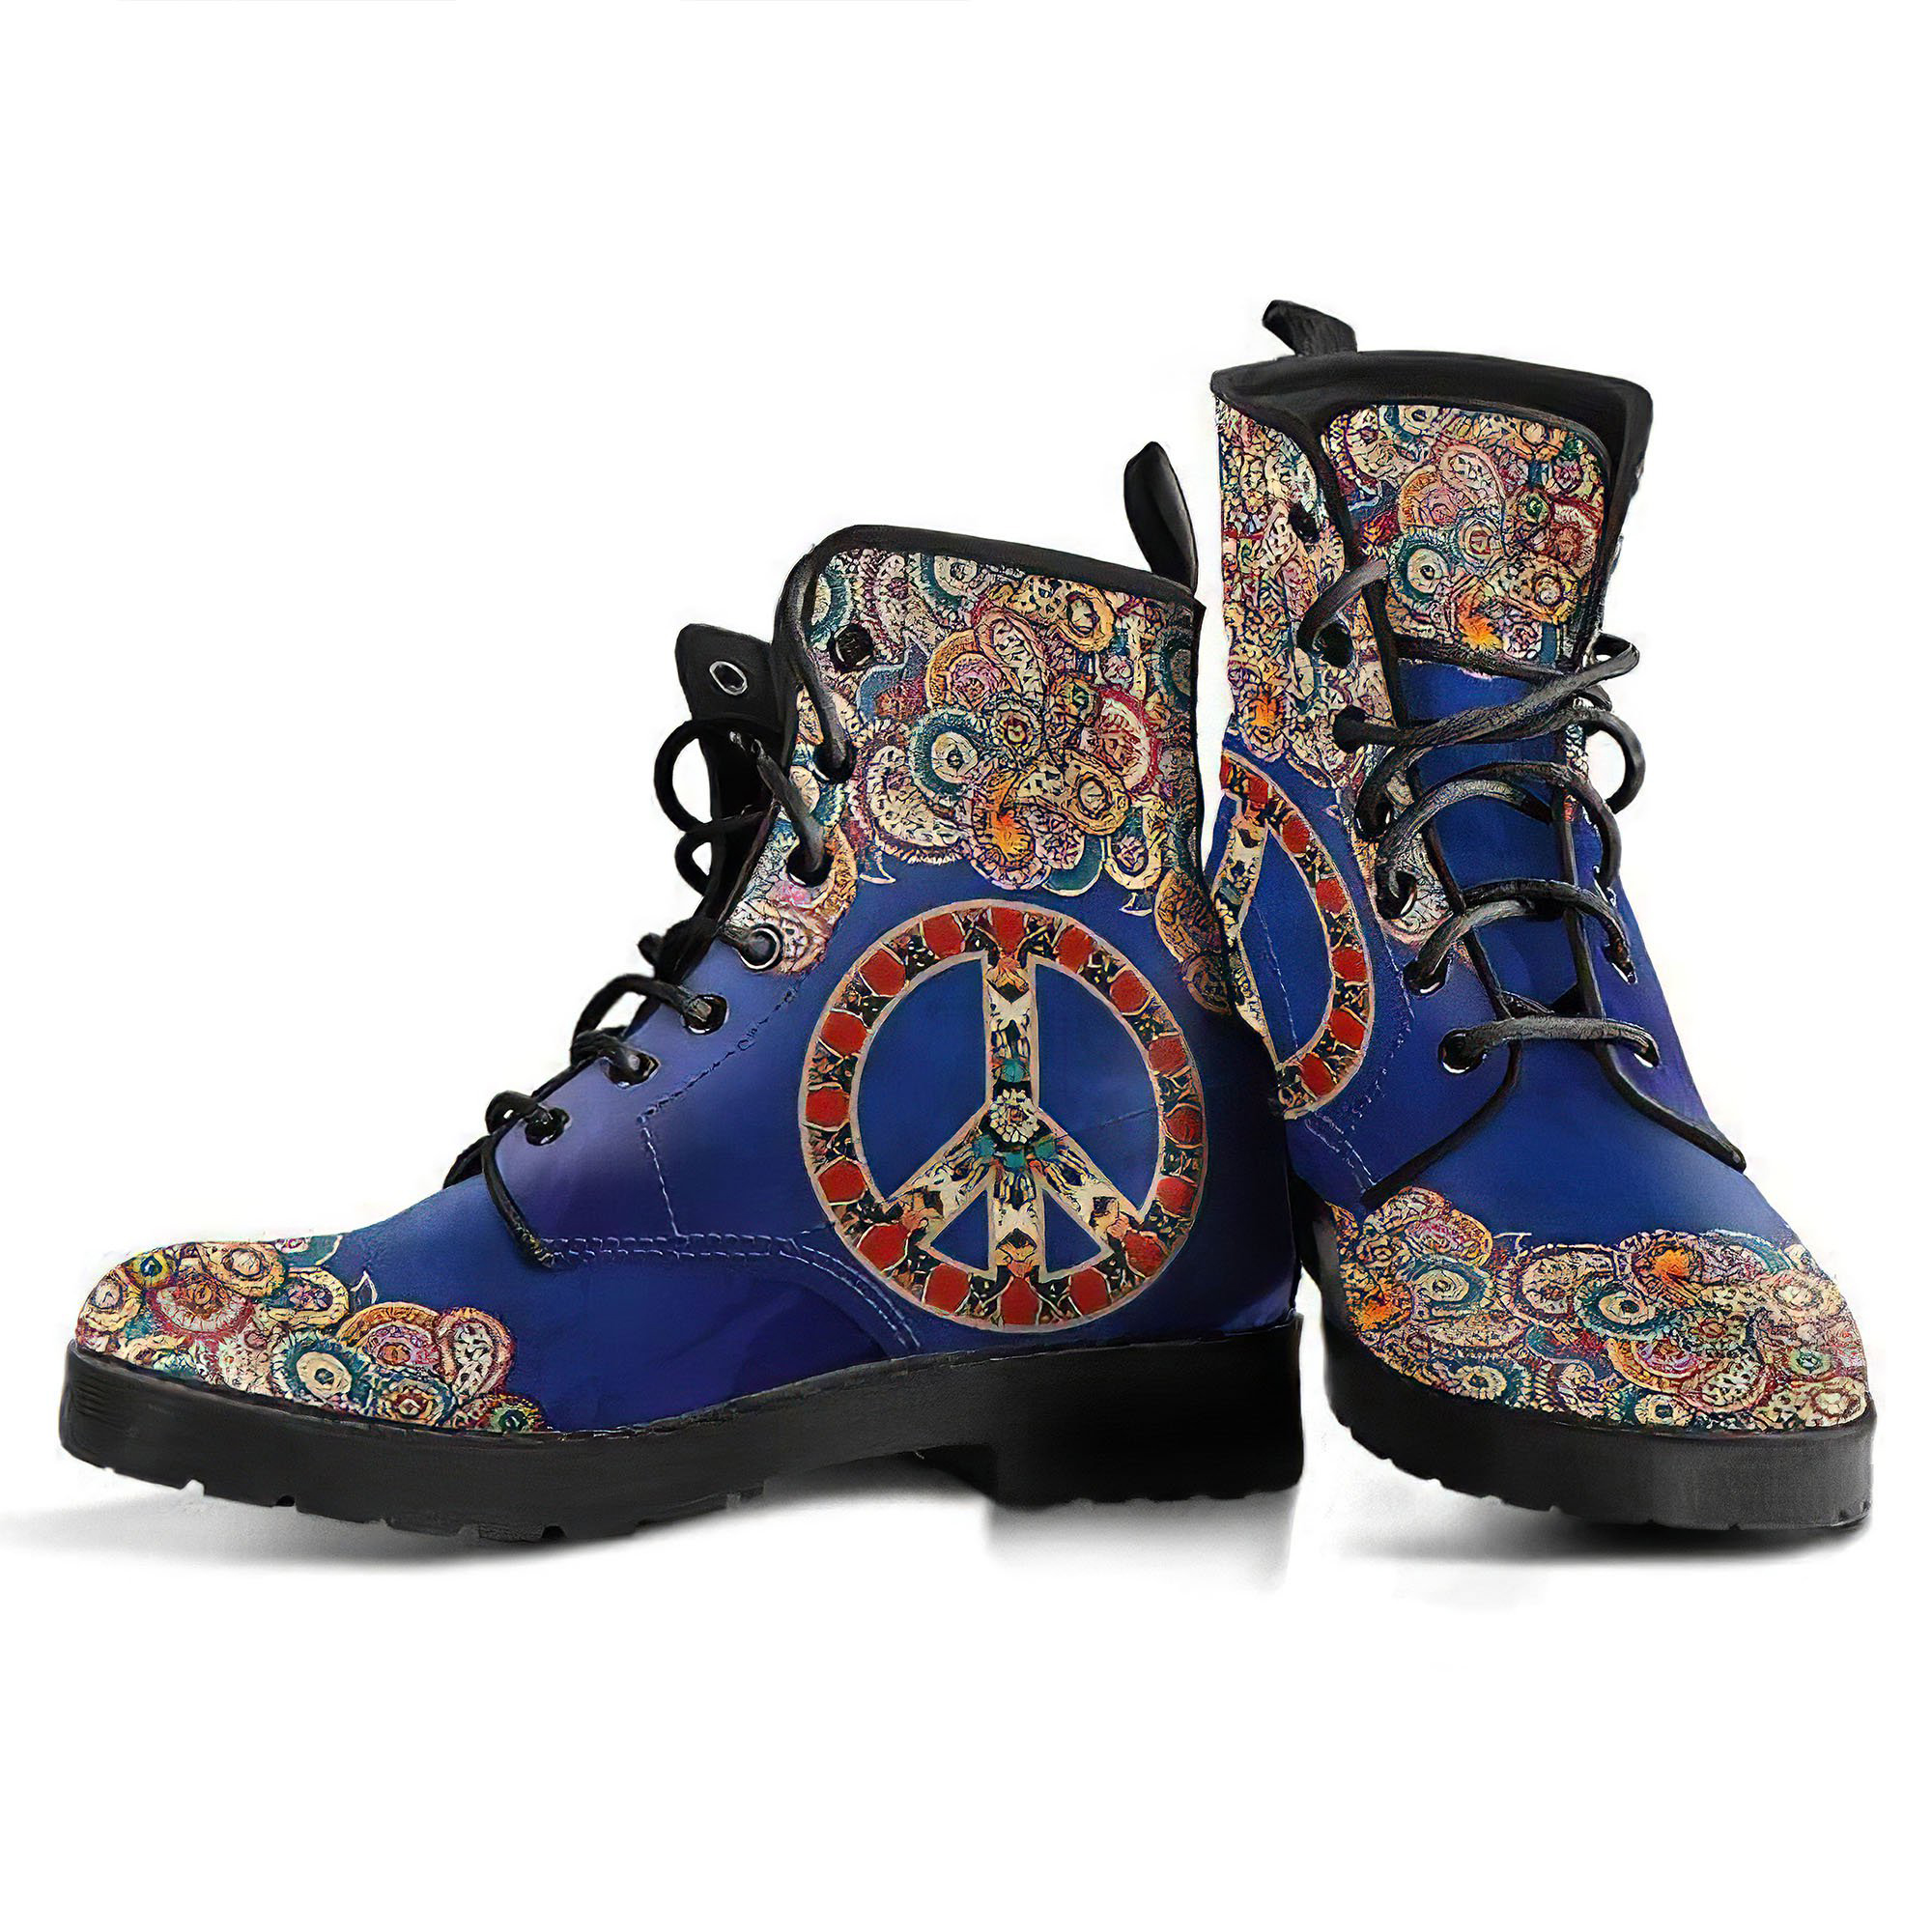 hippie-peace-2-handcrafted-boots-gp-main.jpg